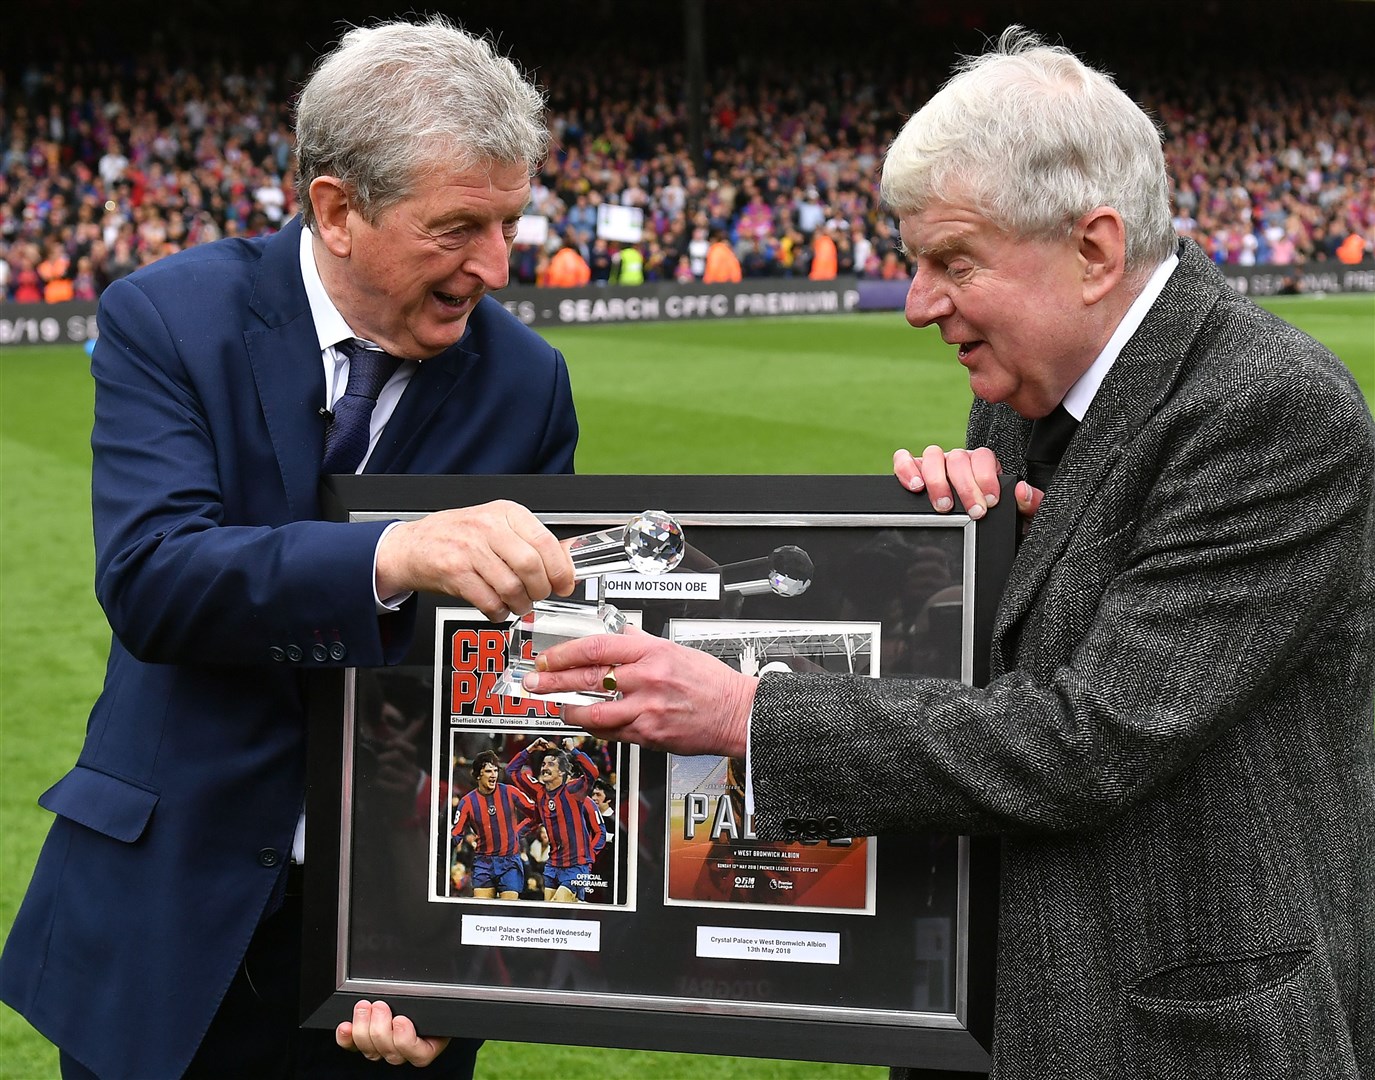 John Motson being presented with an award by Crystal Palace manager Roy Hodgson after the final whistle of his Premier League final commentary (PA)